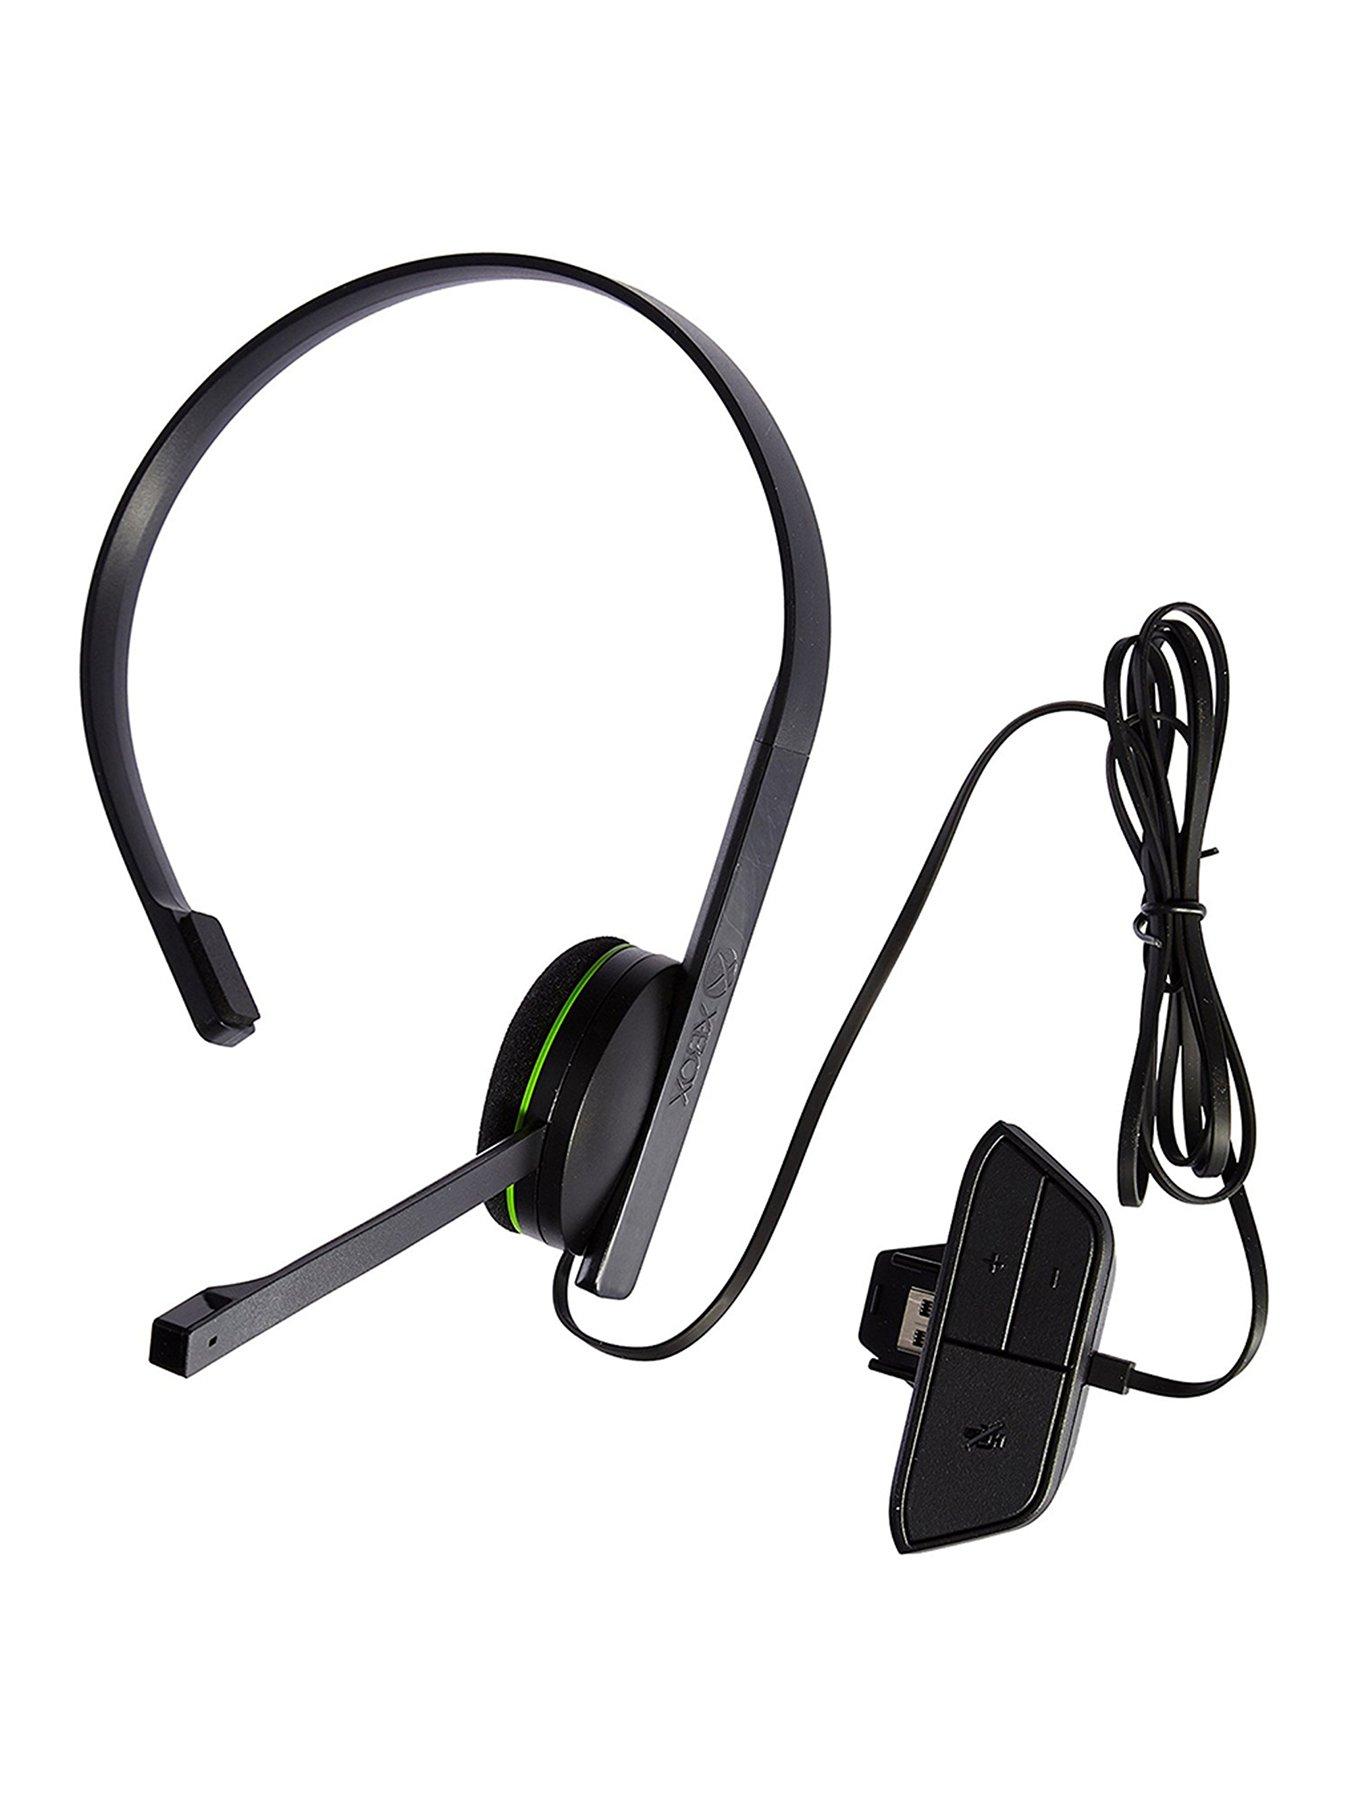 how to use microsoft lifechat lx 3000 headset xbox one